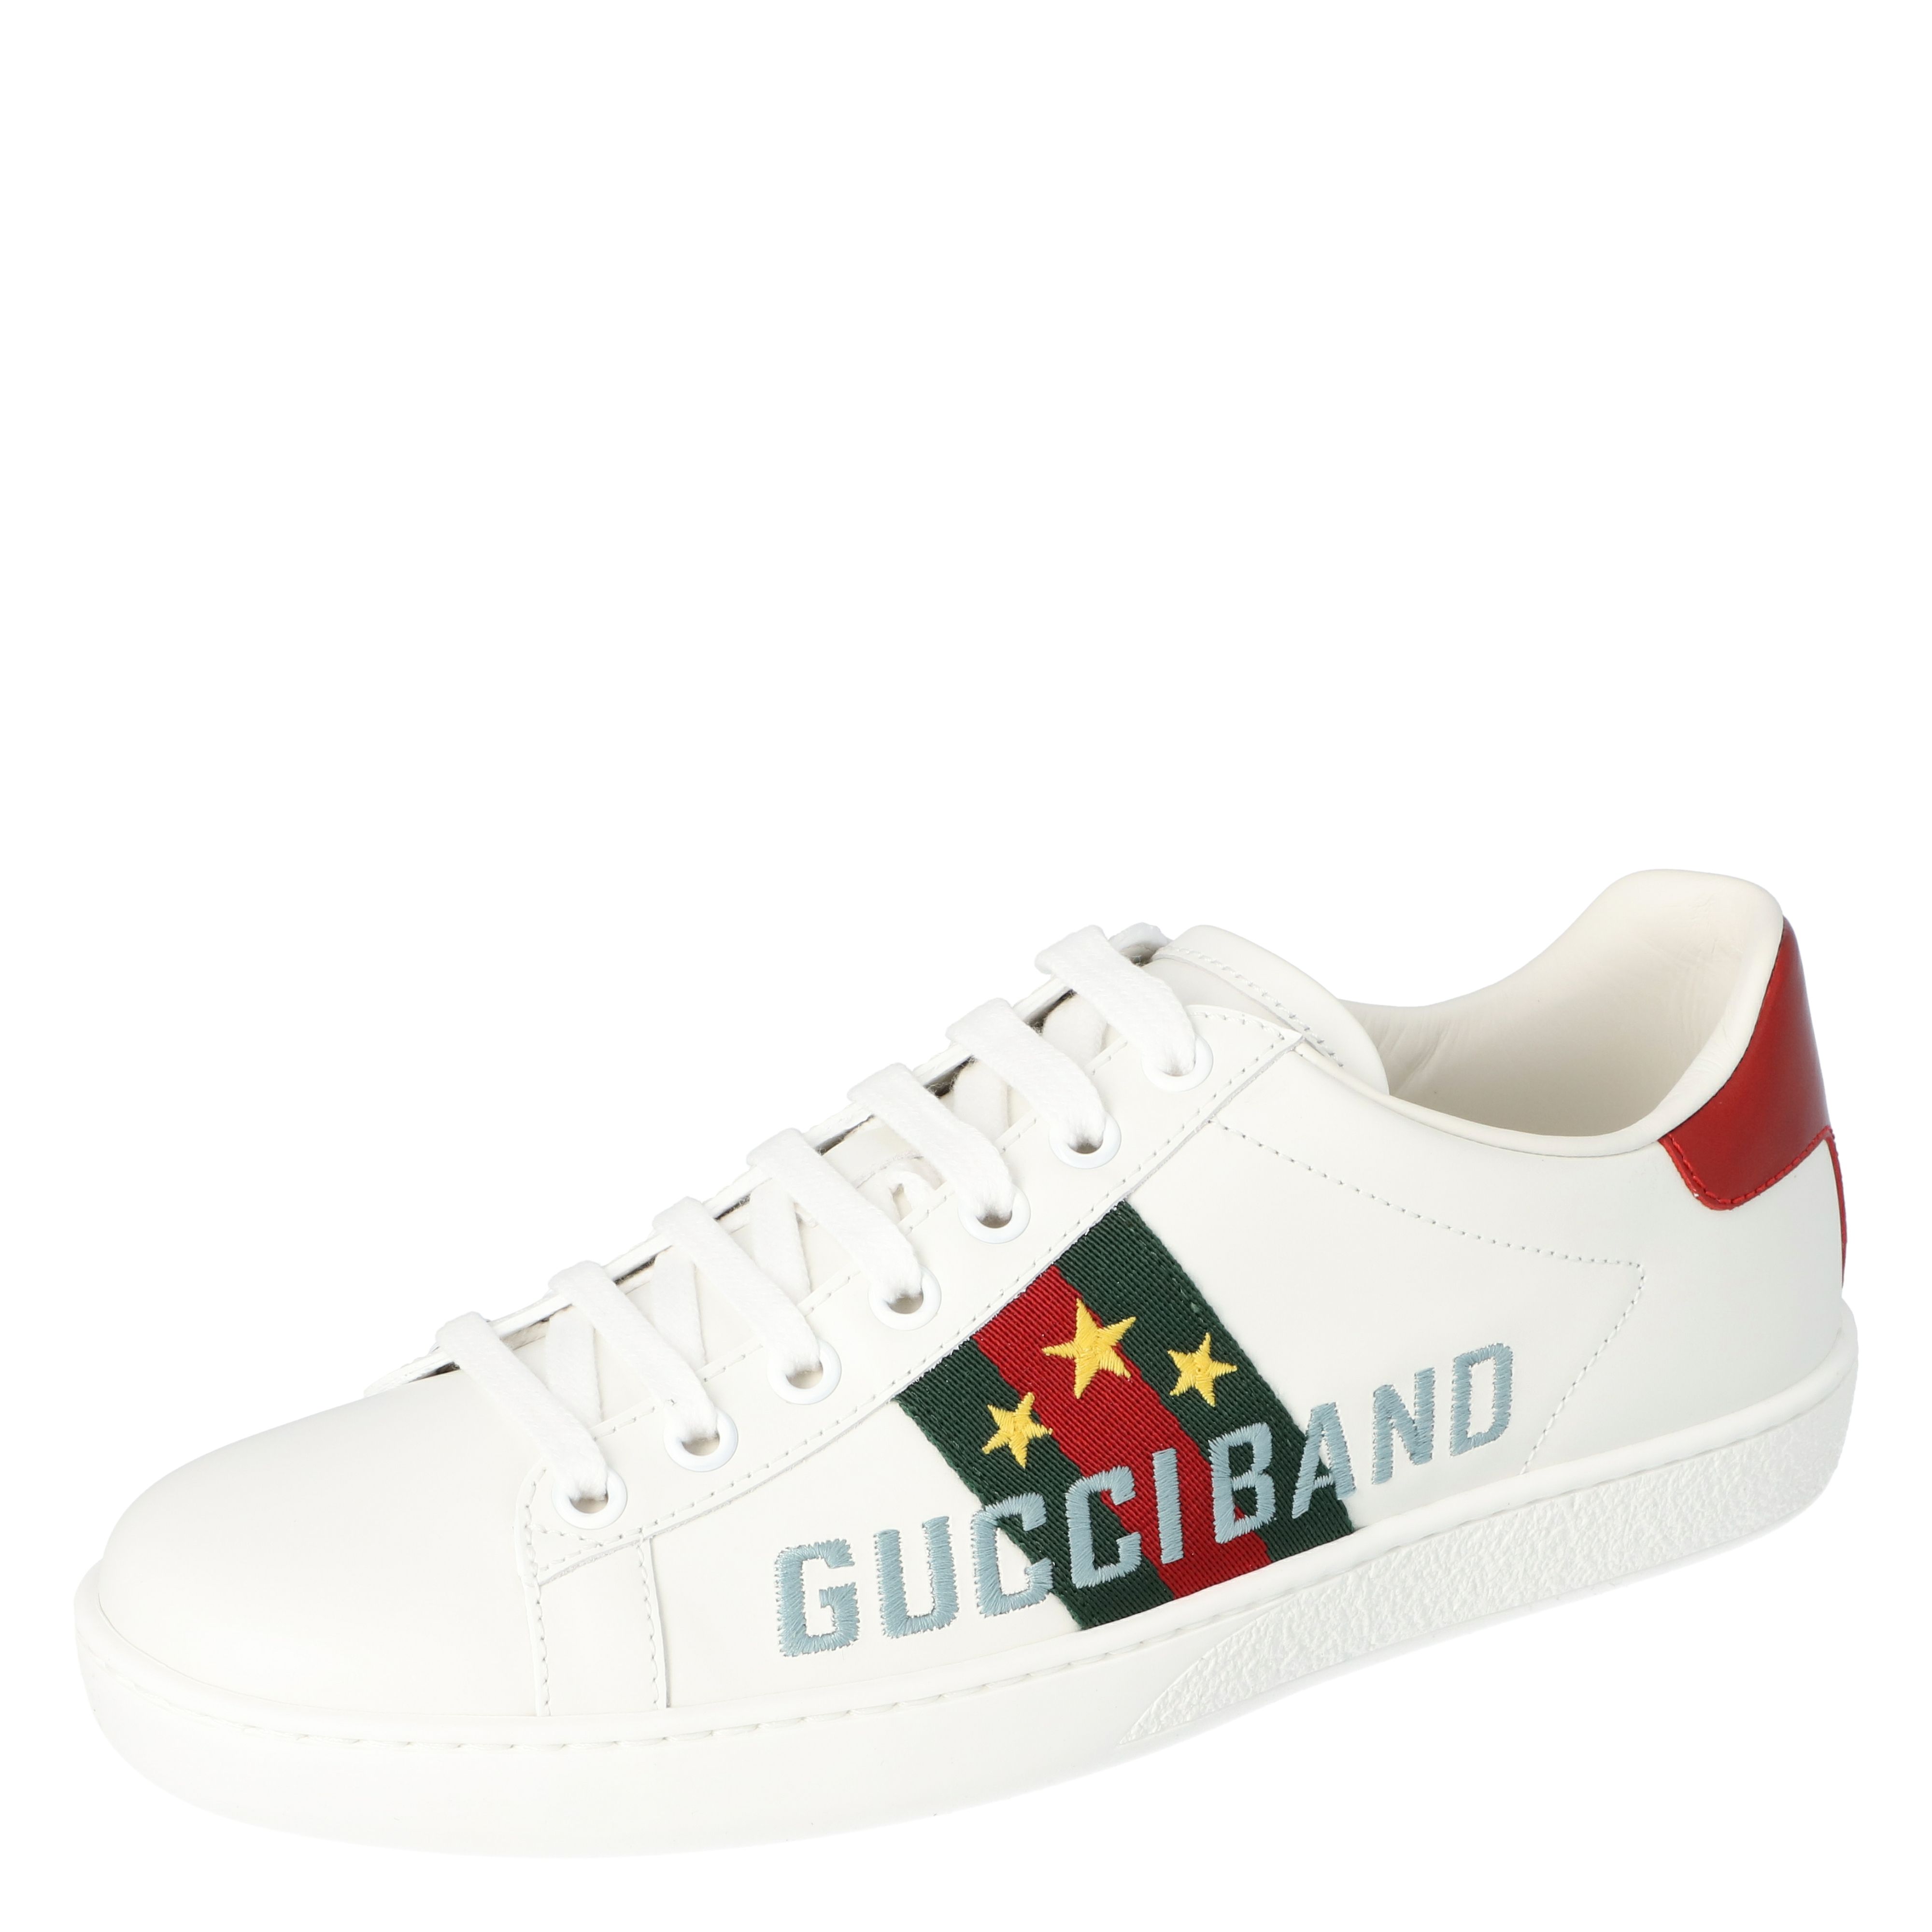 Gucci White Leather Gucci Band Embroidery Ace Low-Top Sneakers Size 39